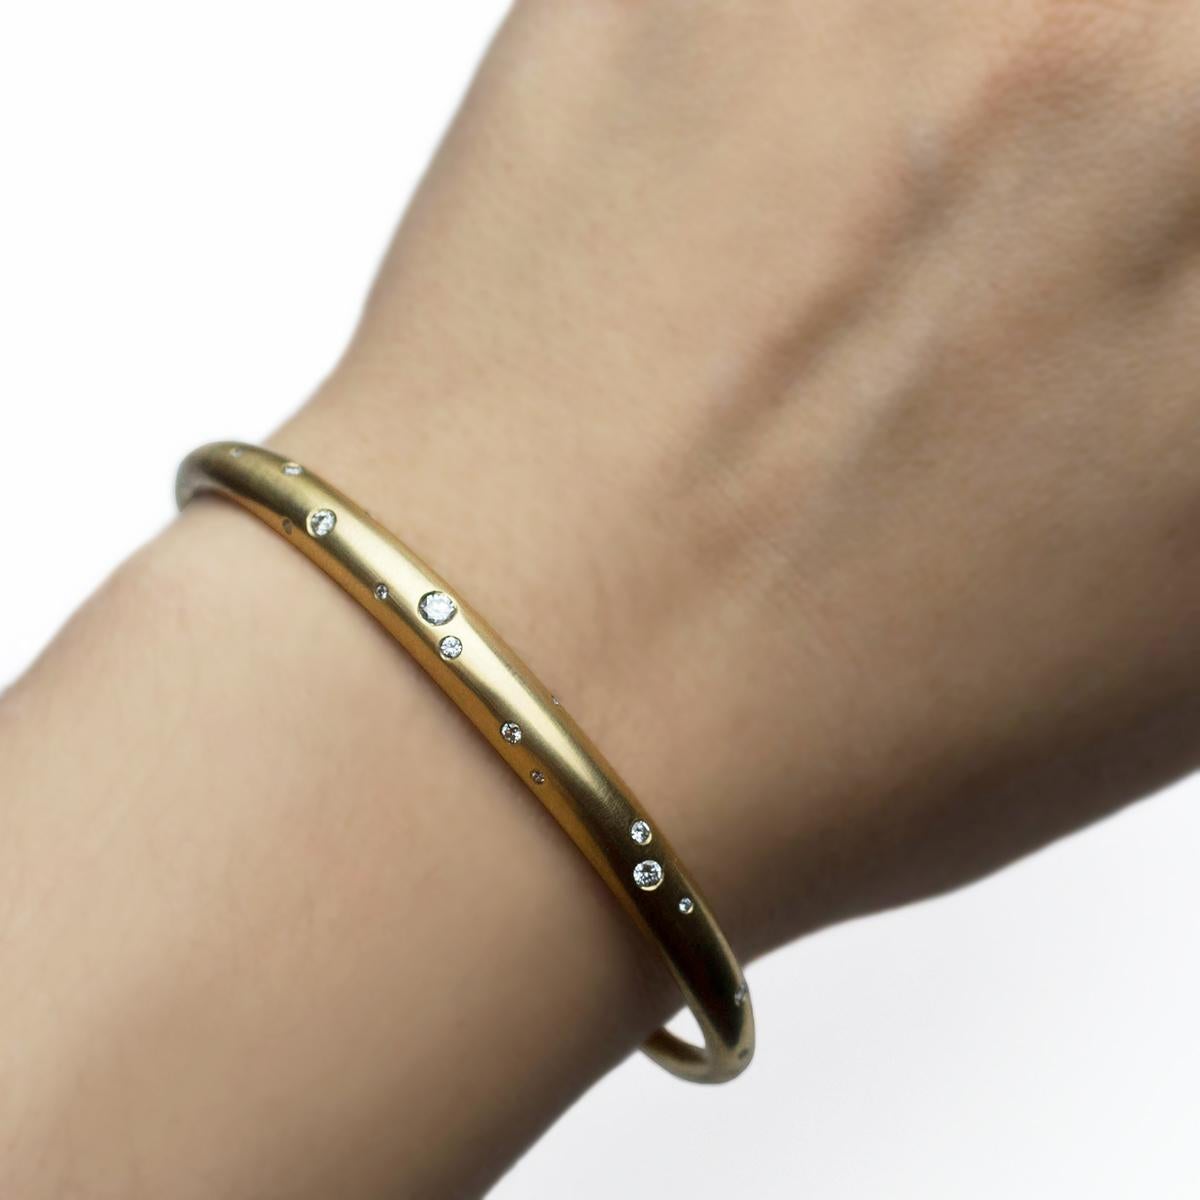 This Liquid Gold Curve Cuff is an everyday staple that you'll reach for each morning. This cuff bracelet hits the perfect note between delicate and substantial, creating a comfortable cuff that will pair well with jeans and a t-shirt or shimmering